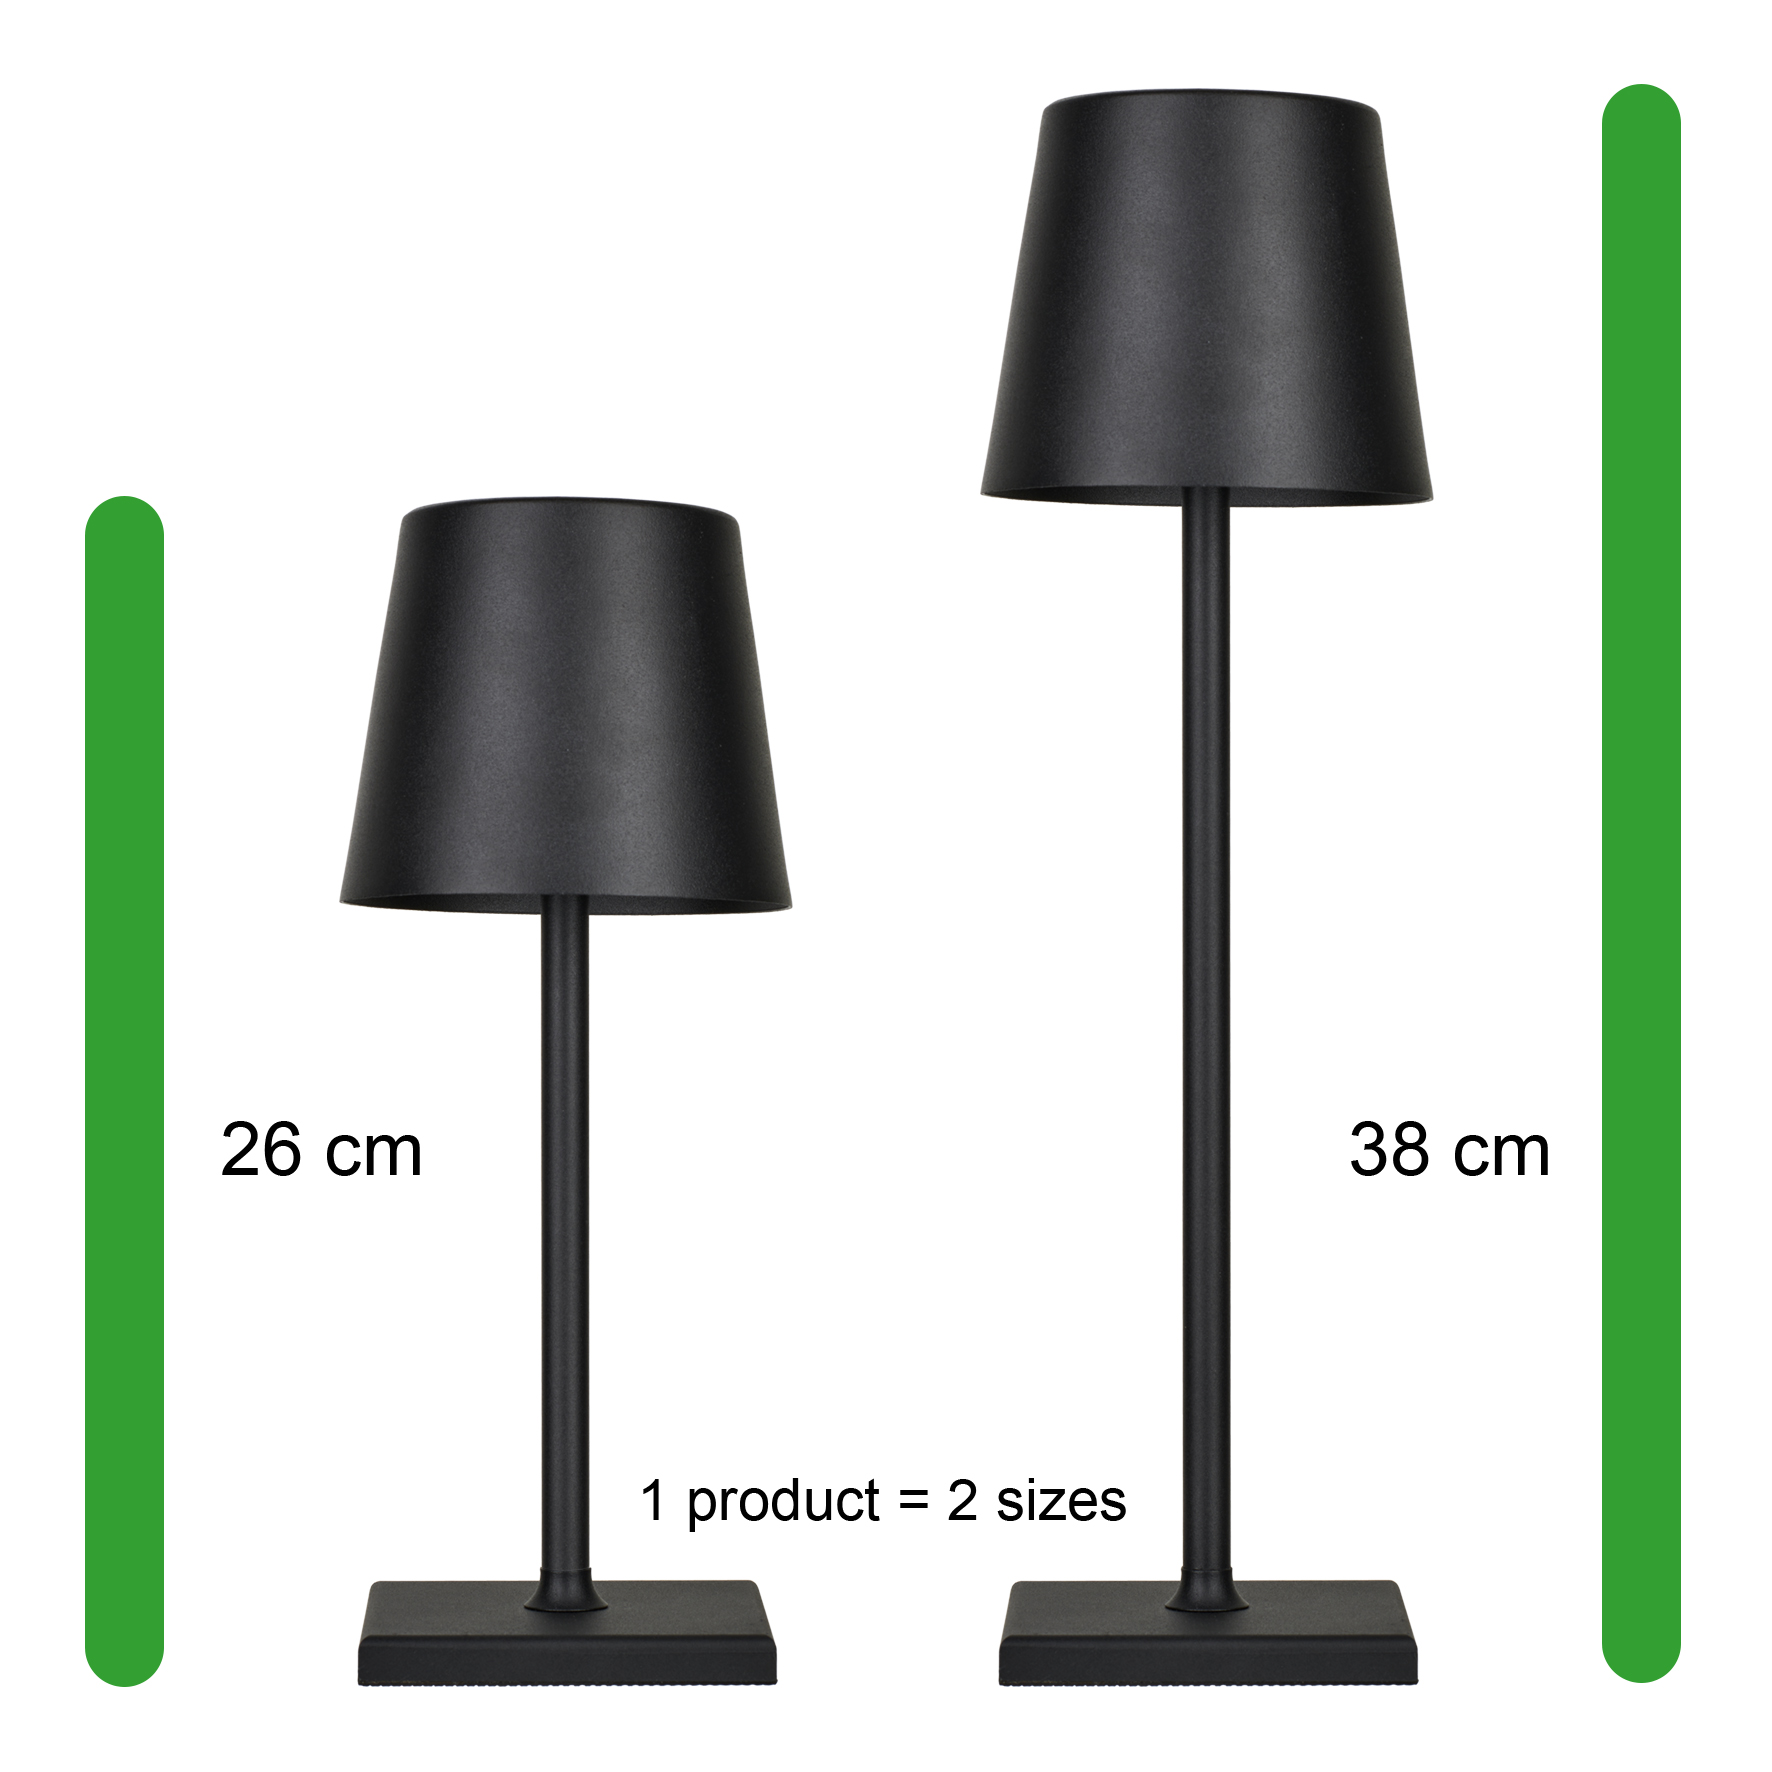 LED Table Lamp Charge&Go Black 3.5W 2700K 210lm IP54